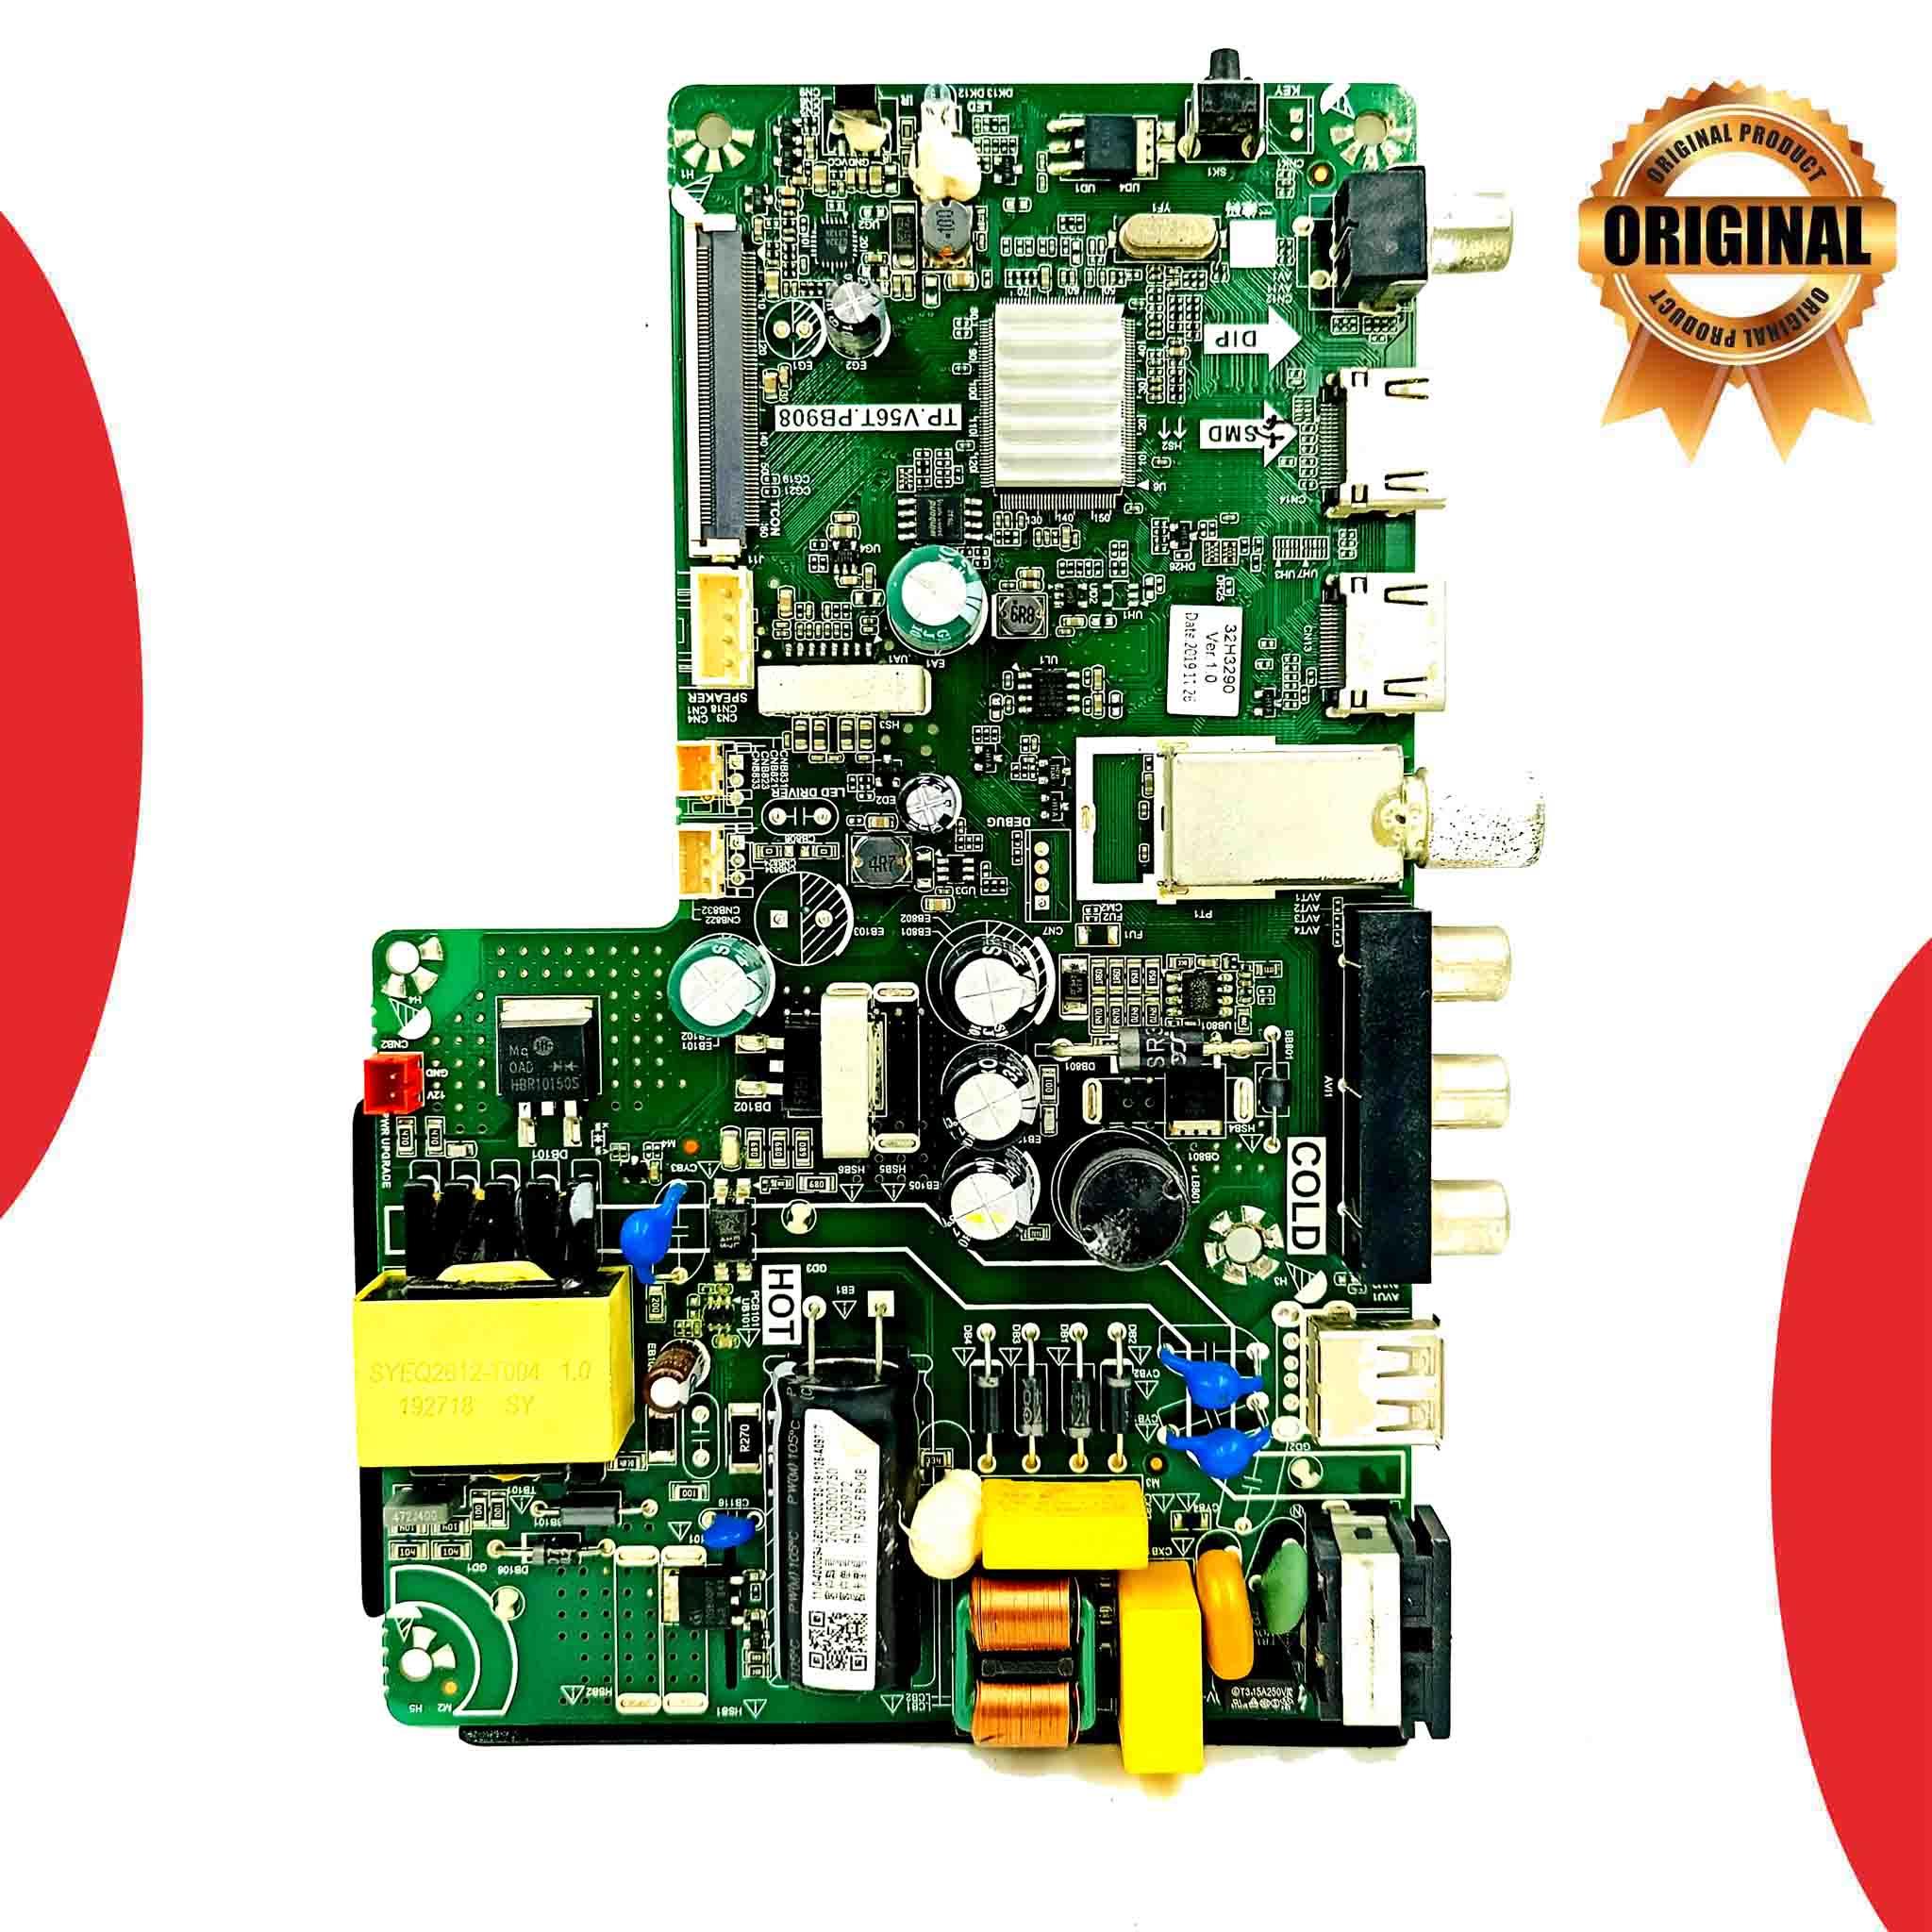 Model 32H3290 Reconnect LED TV Motherboard - Great Bharat Electronics